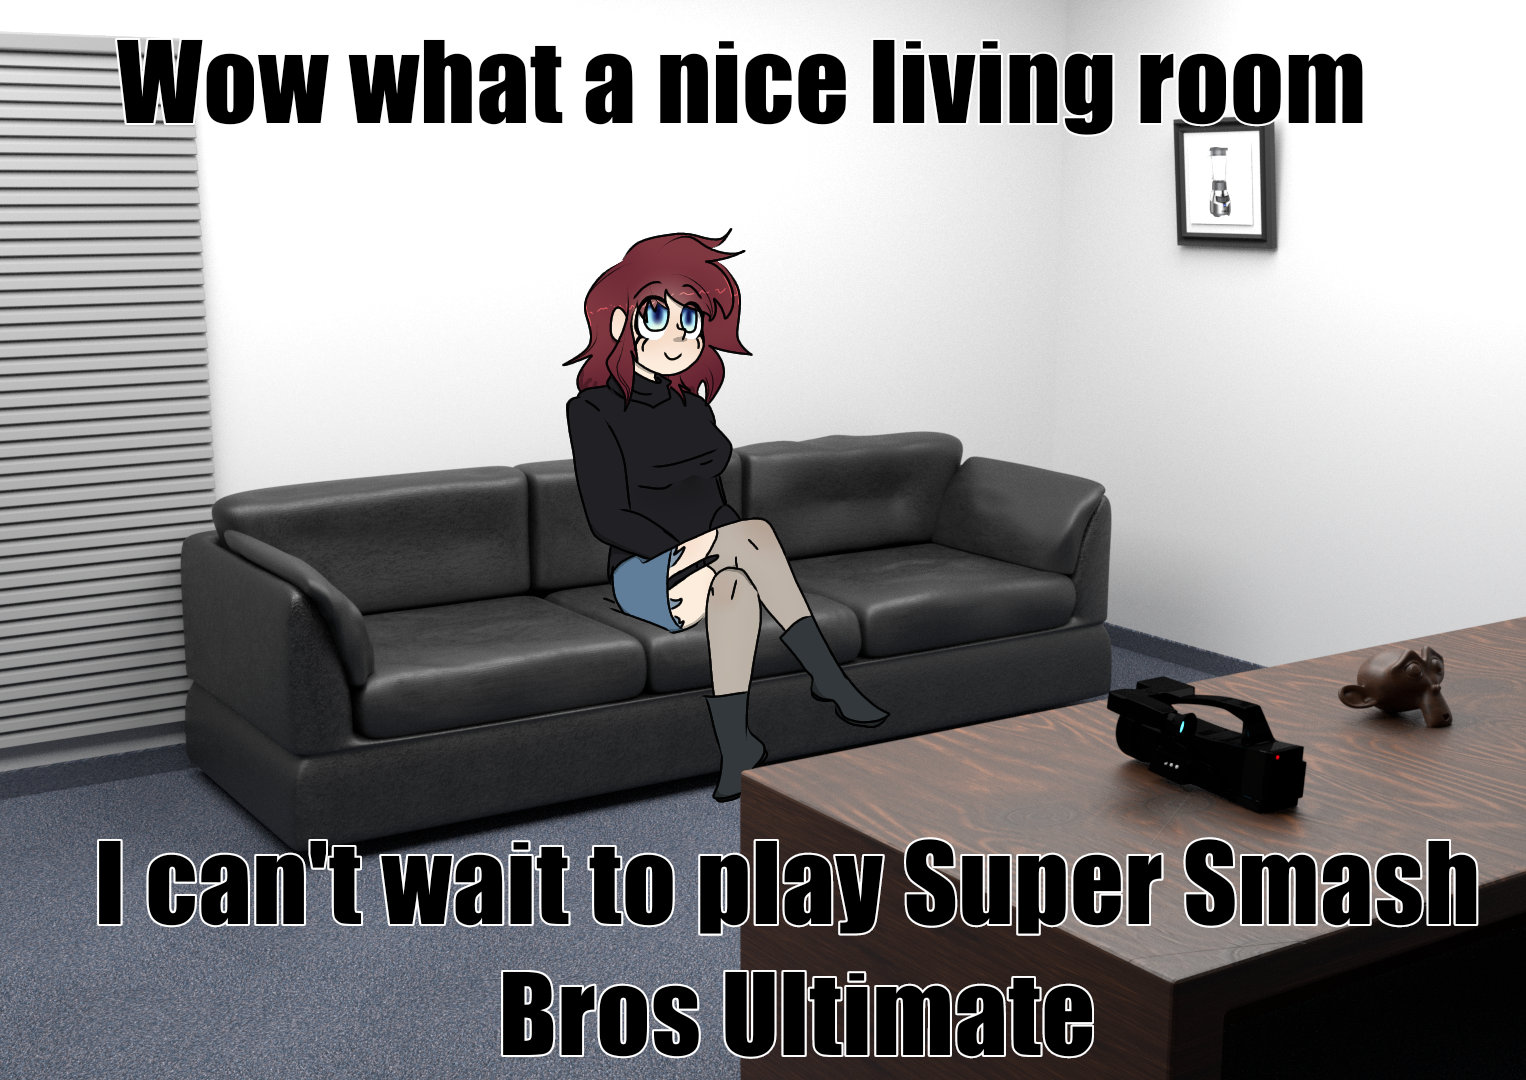 dank memes - computer technology review - Wow what a nice living room I can't wait to play Super Smash Bros Ultimate